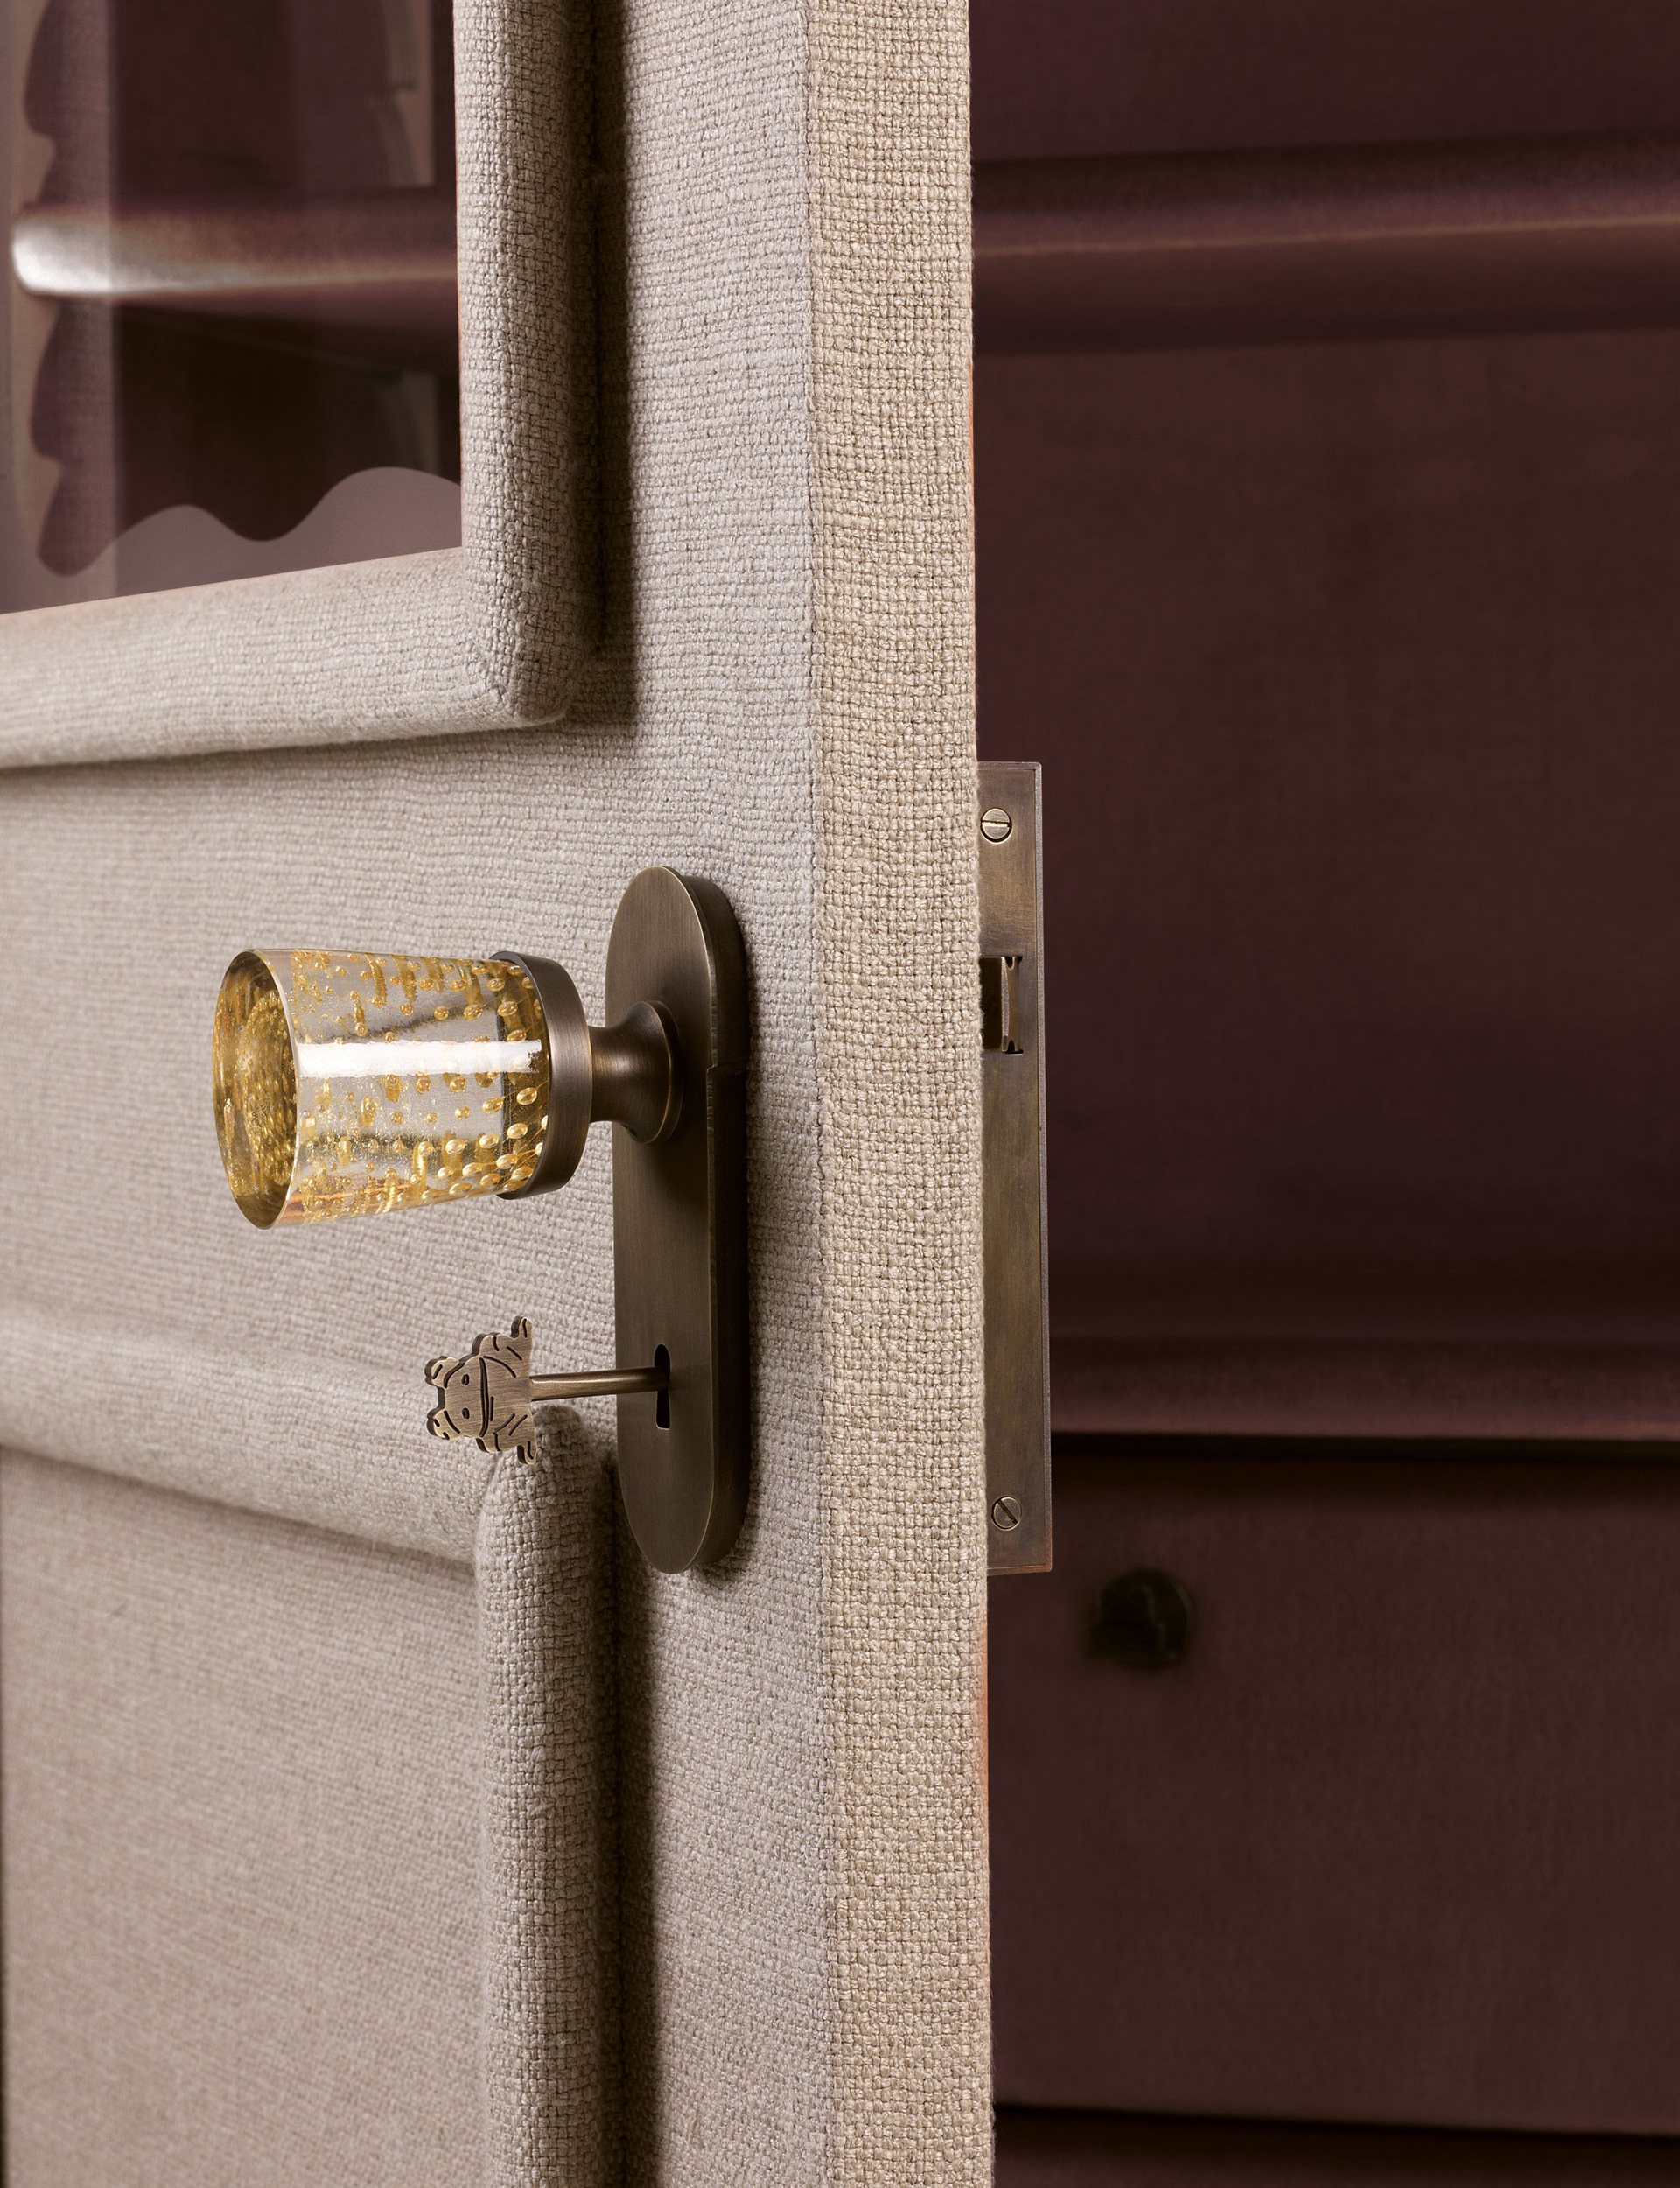 Handle detail of George, a wooden modular wardrobe with two, three or four doors covered in velvet or linen and details in bronze, from the Promemoria's catalogue | Promemoria